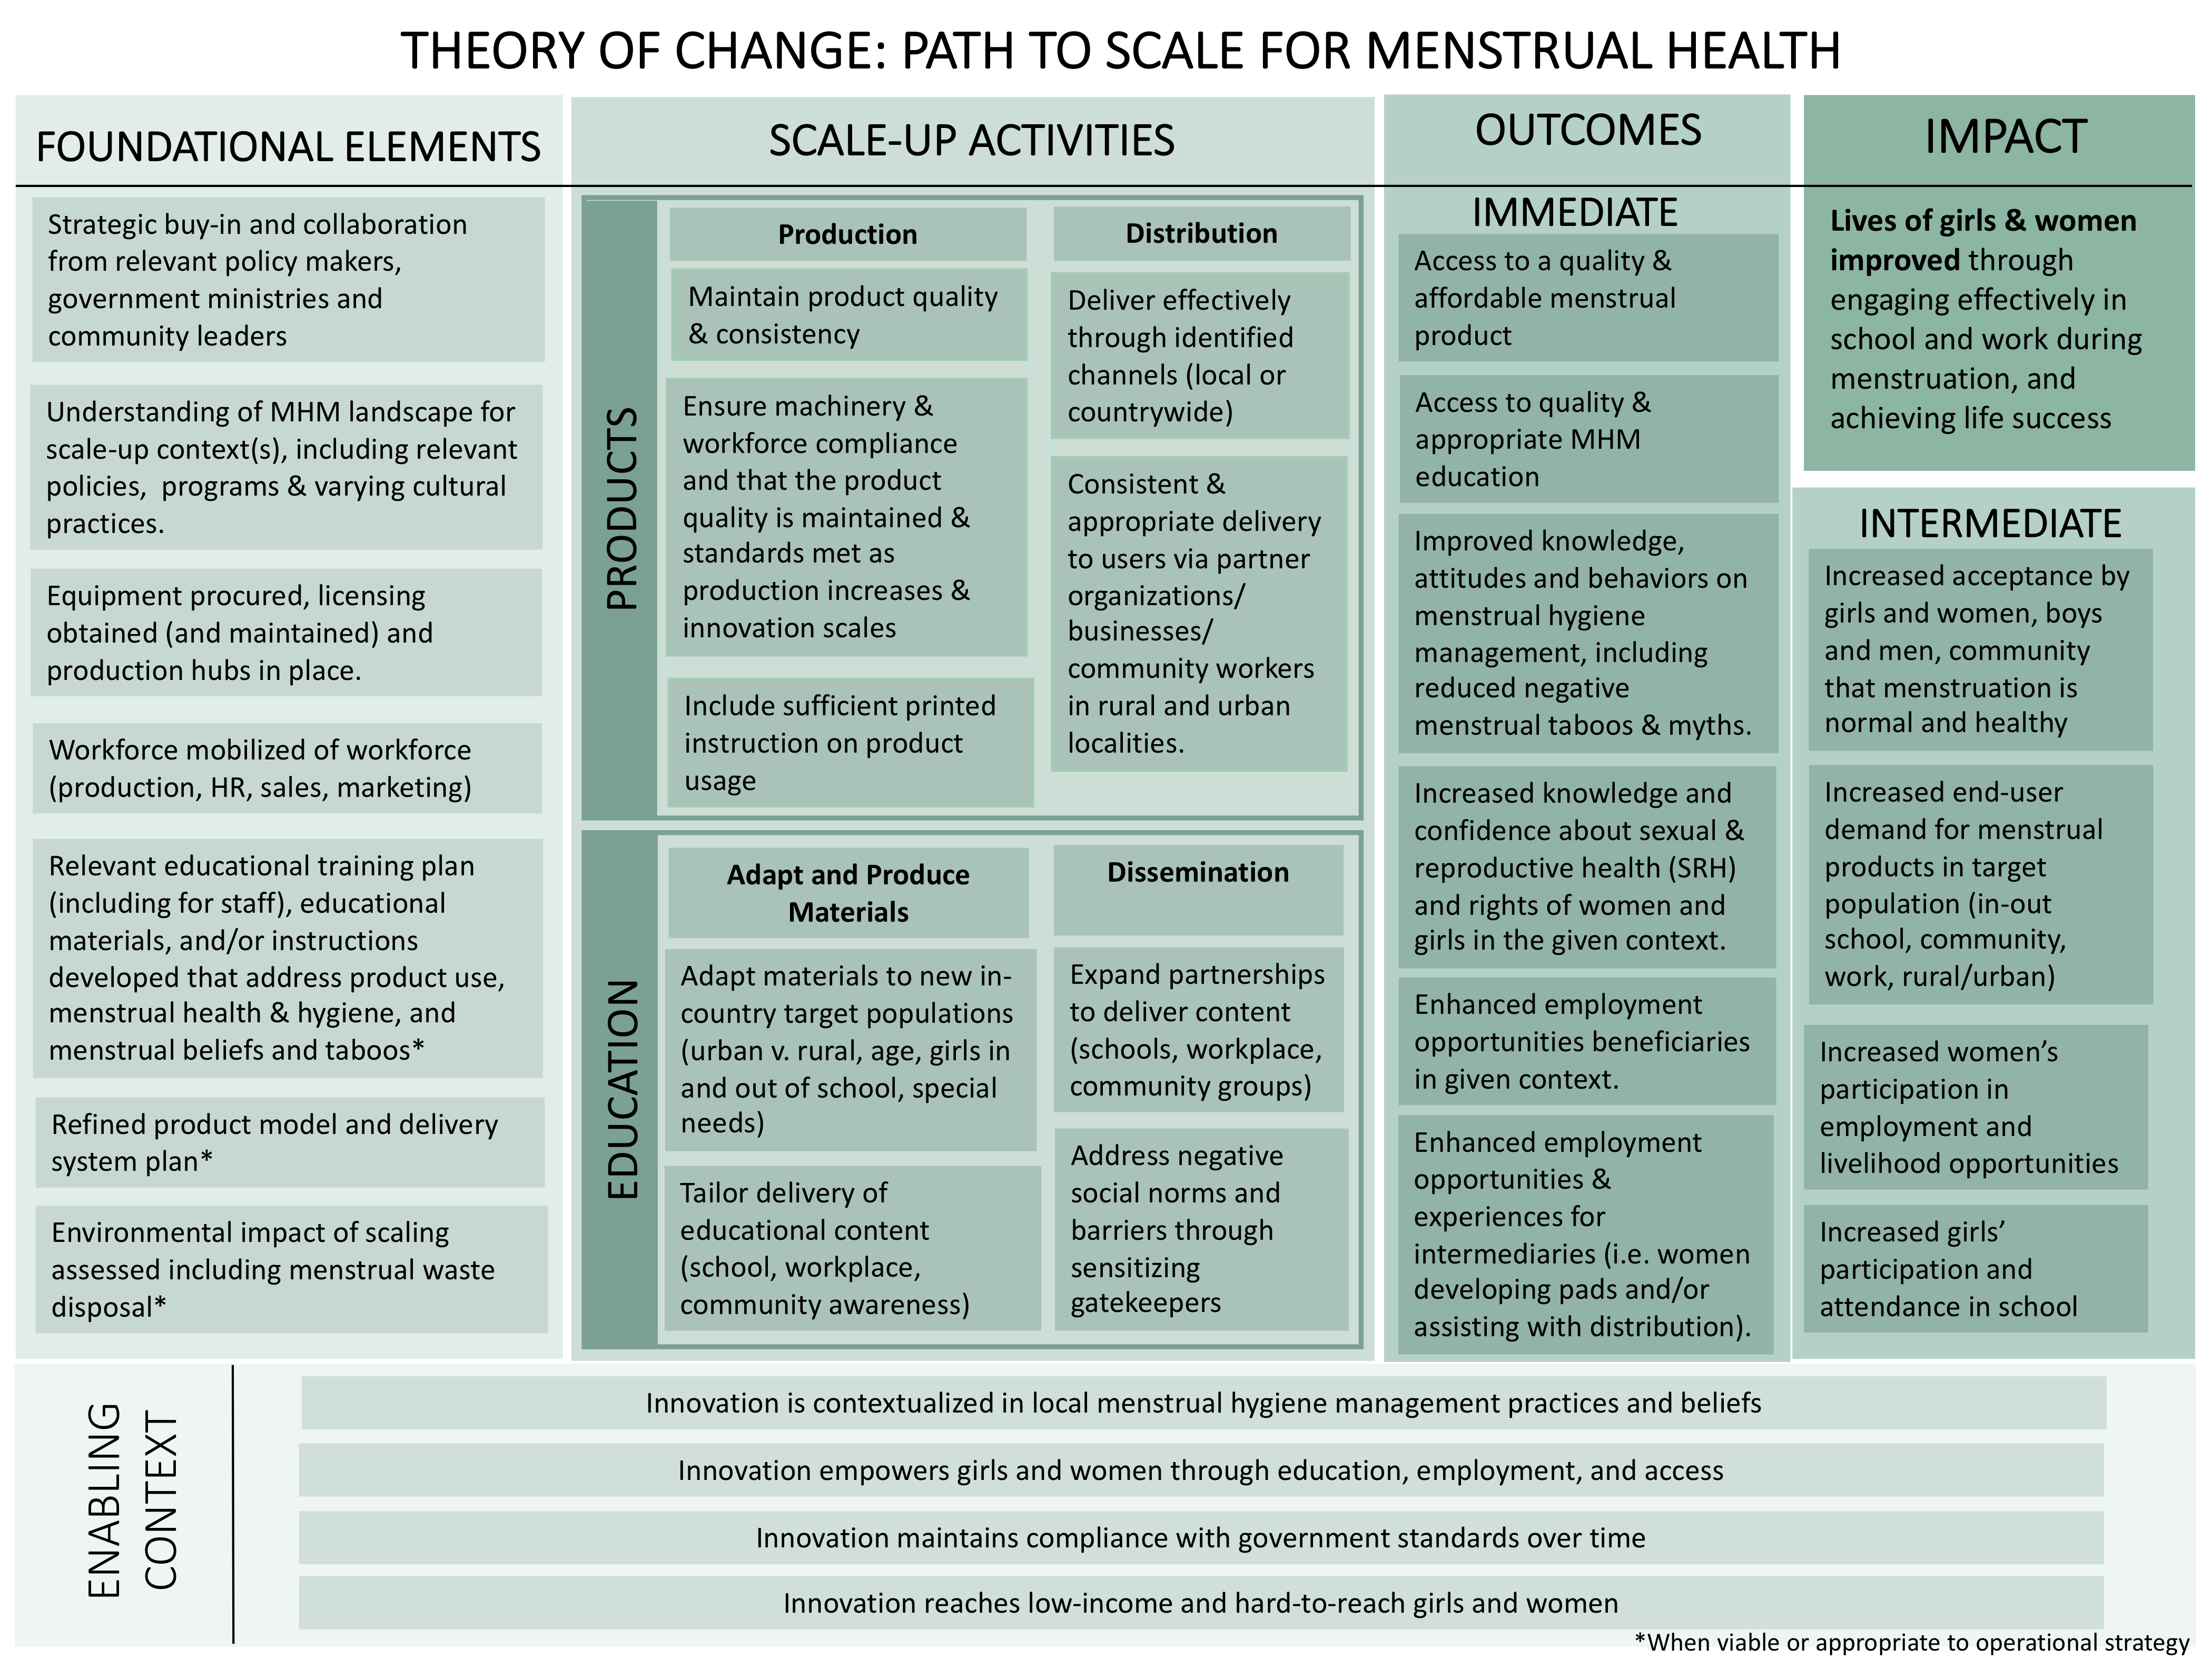 Improving the impact of menstrual health innovations in low- and  middle-income countries: a theory of change and measurement framework   Published in Journal of Global Health Reports